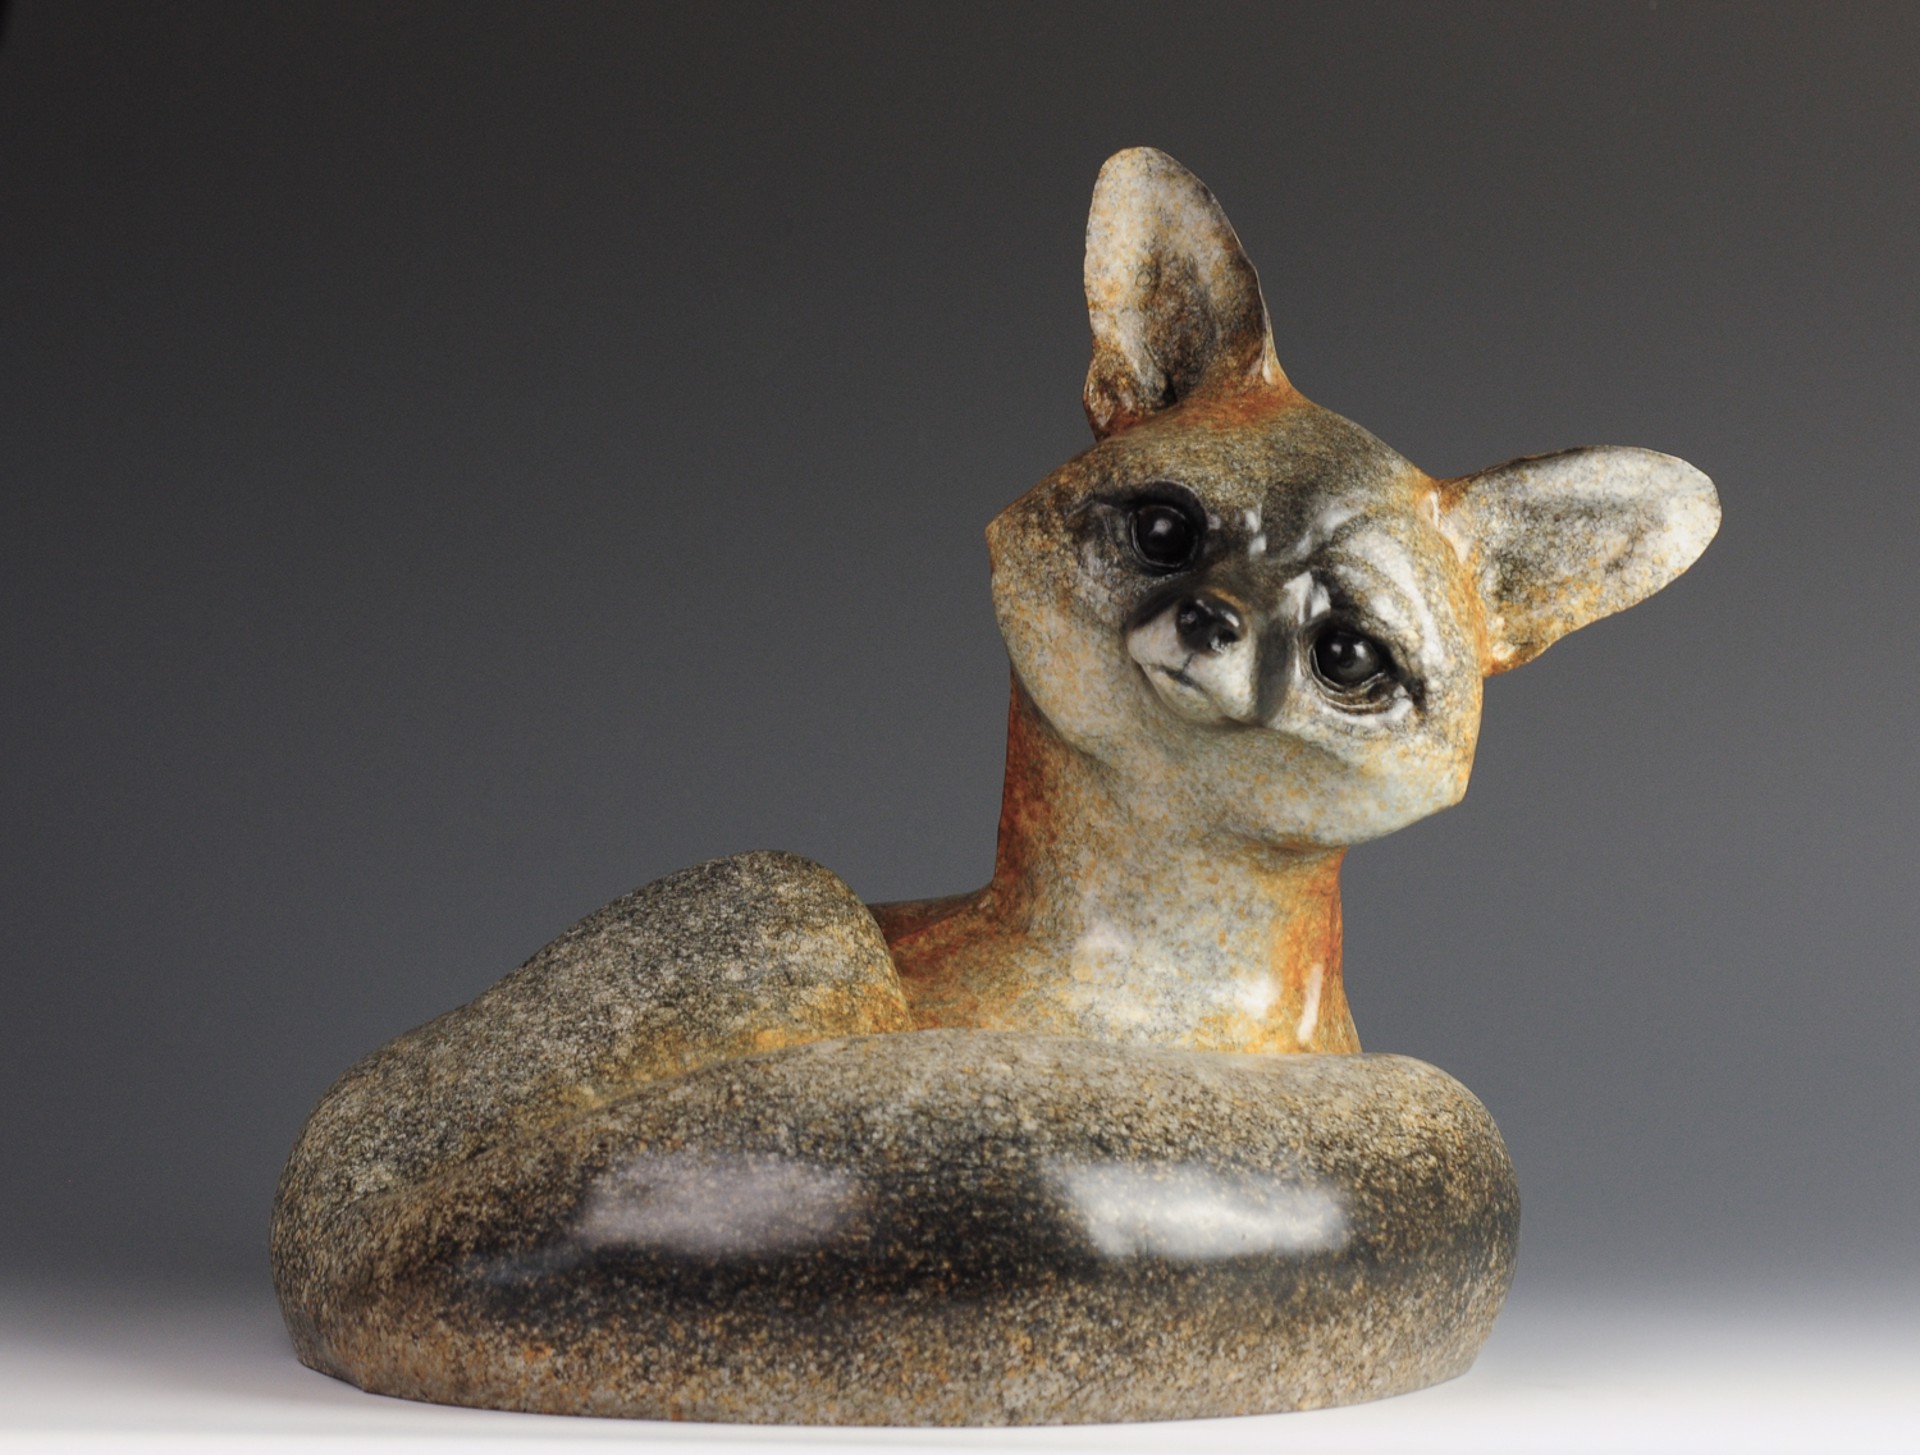 A Fine Art Sculpture In Bronze By Jeremy Bradshaw Featuring A Small Fox With Tilted Head, Available At Gallery Wild